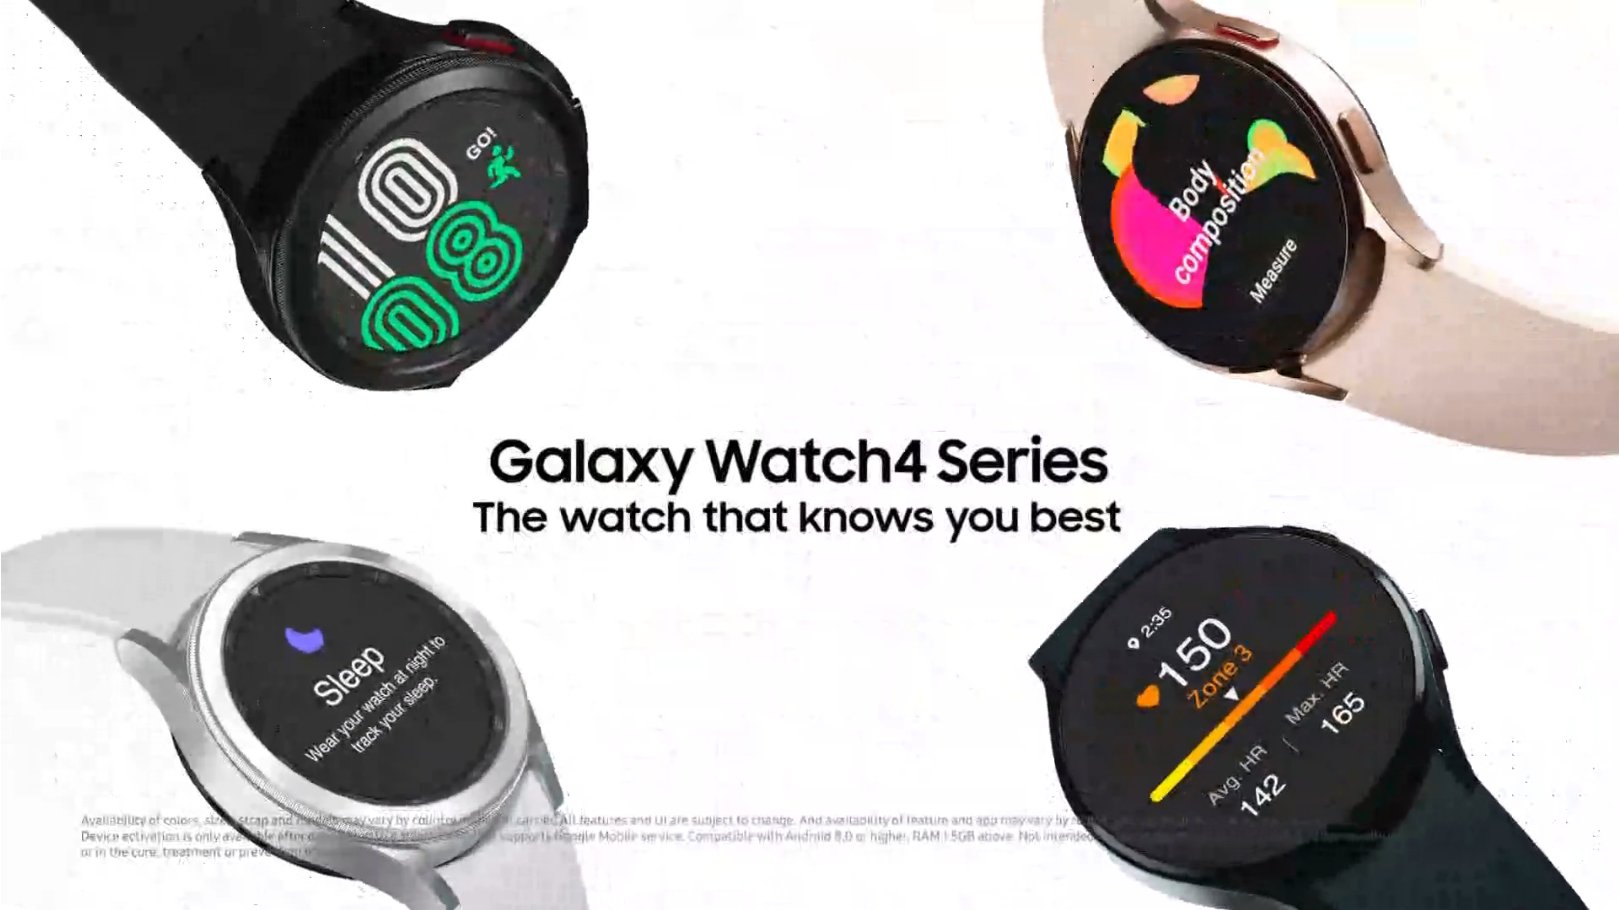 Berouw Diplomatieke kwesties zag Samsung Galaxy Watch 4 and Galaxy Watch 4 Classic product slides leak ahead  of August 11 unveiling - NotebookCheck.net News